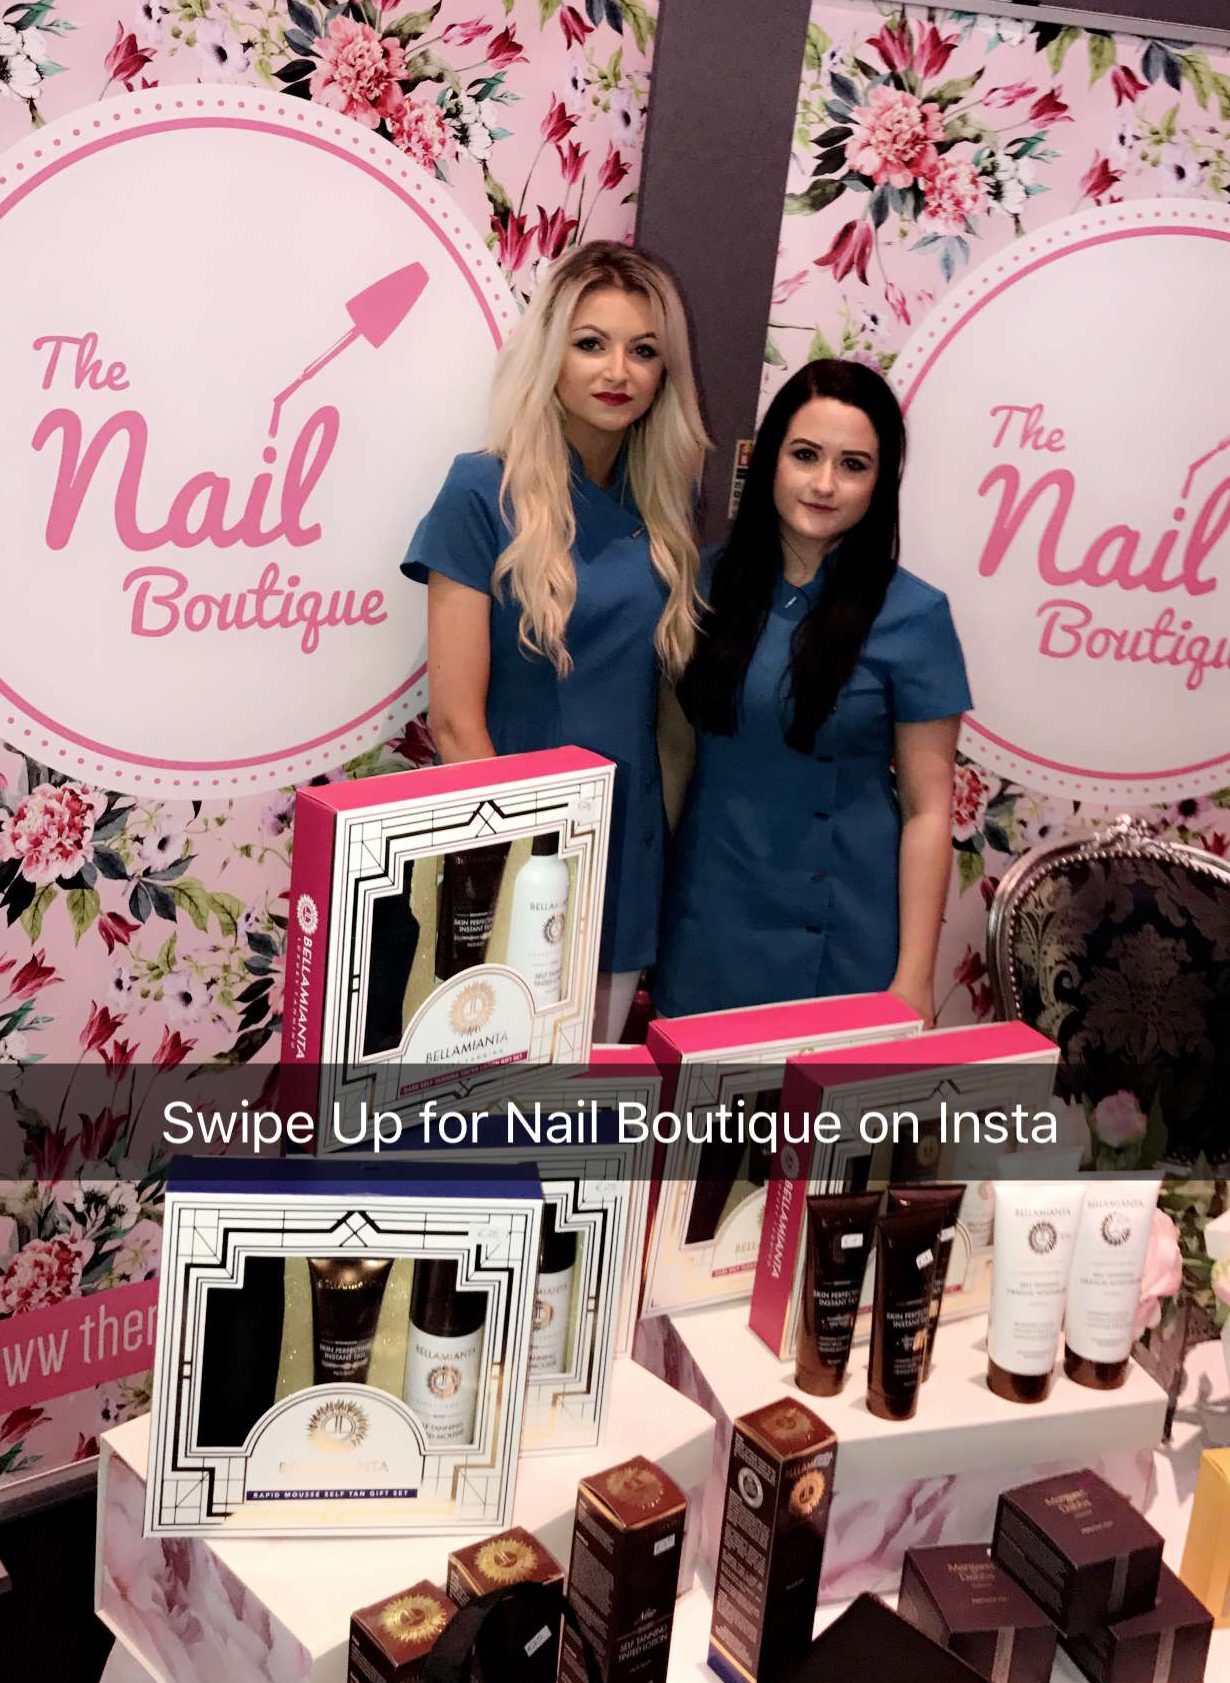 The Nail Boutique Stand